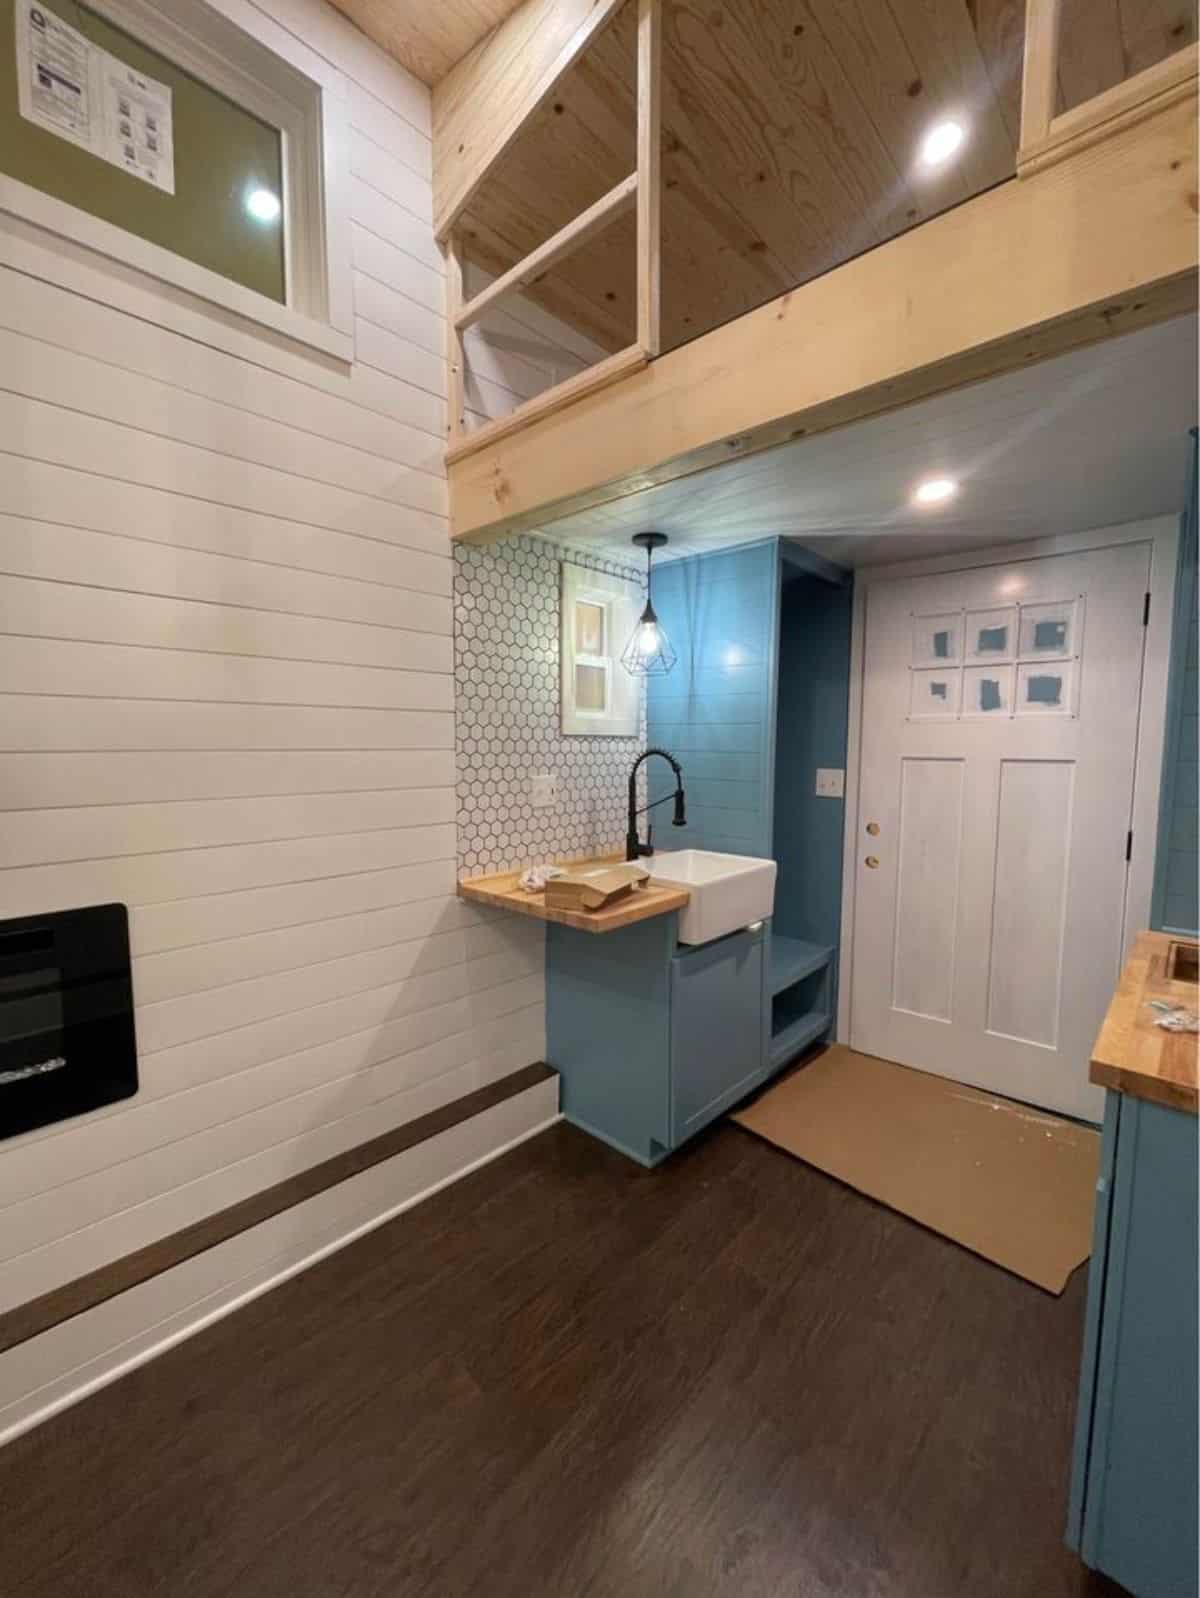 Kitchen area of 20' Noah Certified Tiny House on Wheels